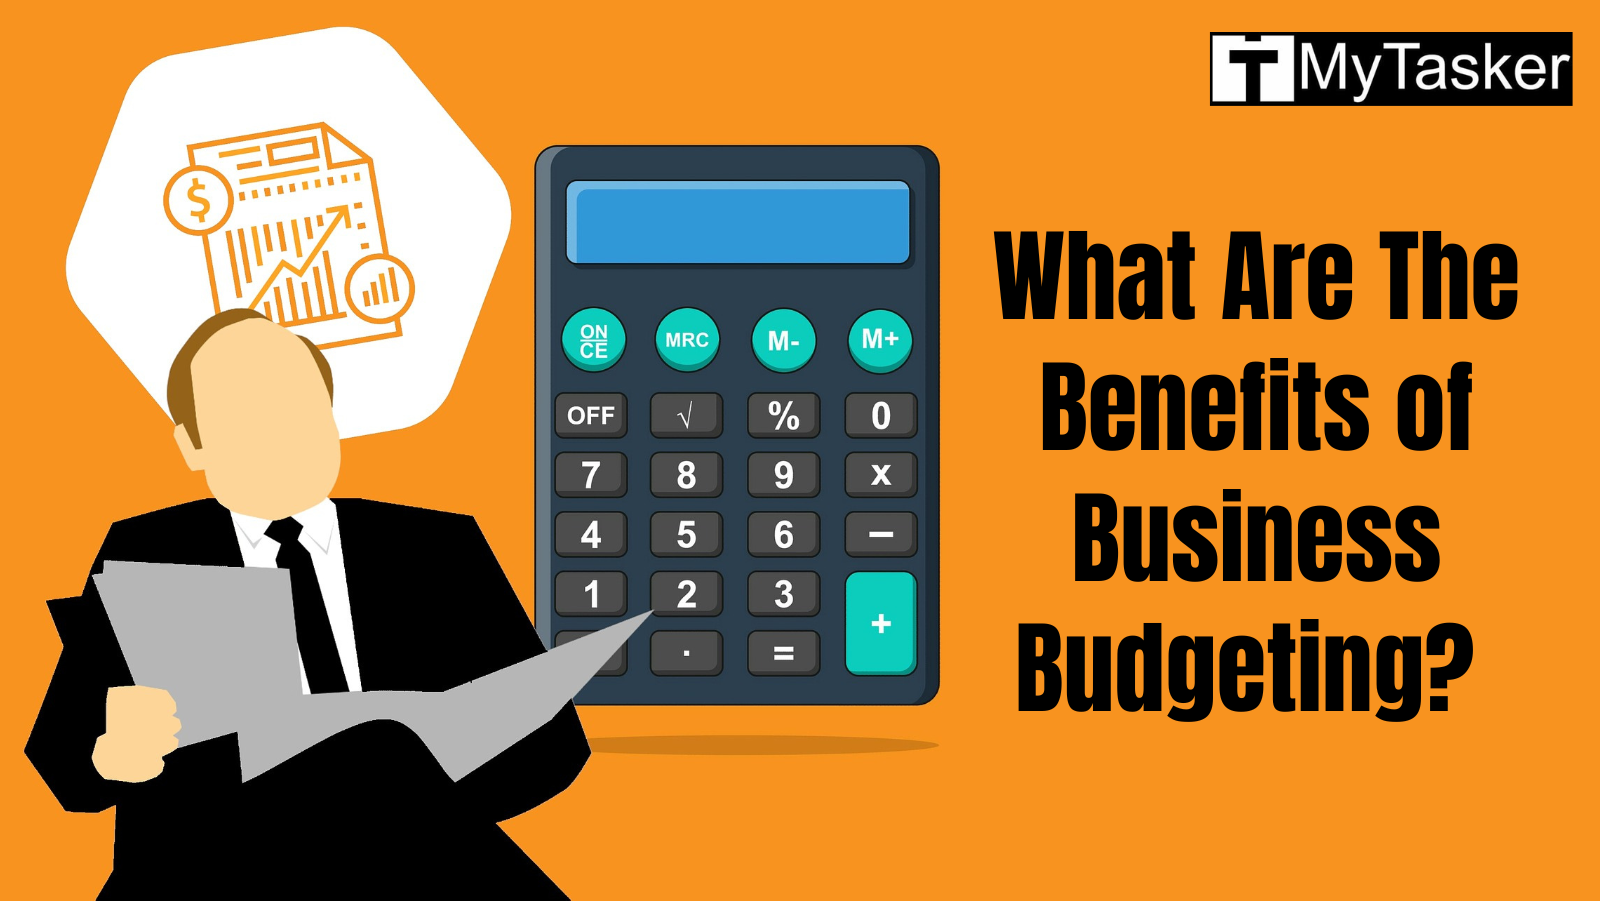 What Are The Benefits of Business Budgeting?